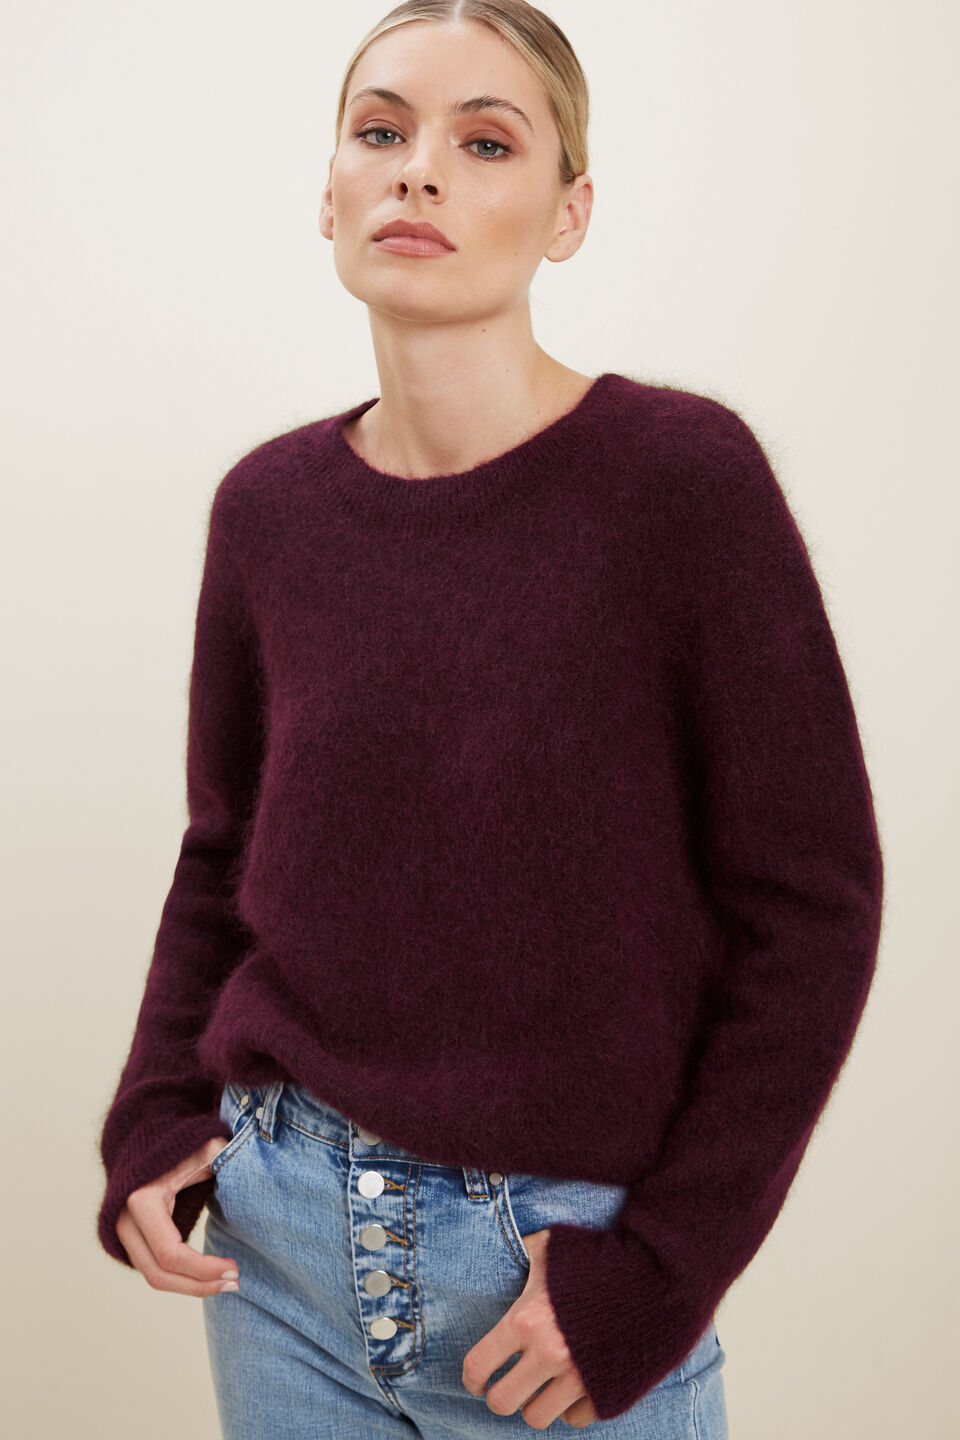 Mohair Crew Neck Sweater  Ruby Plum Marle